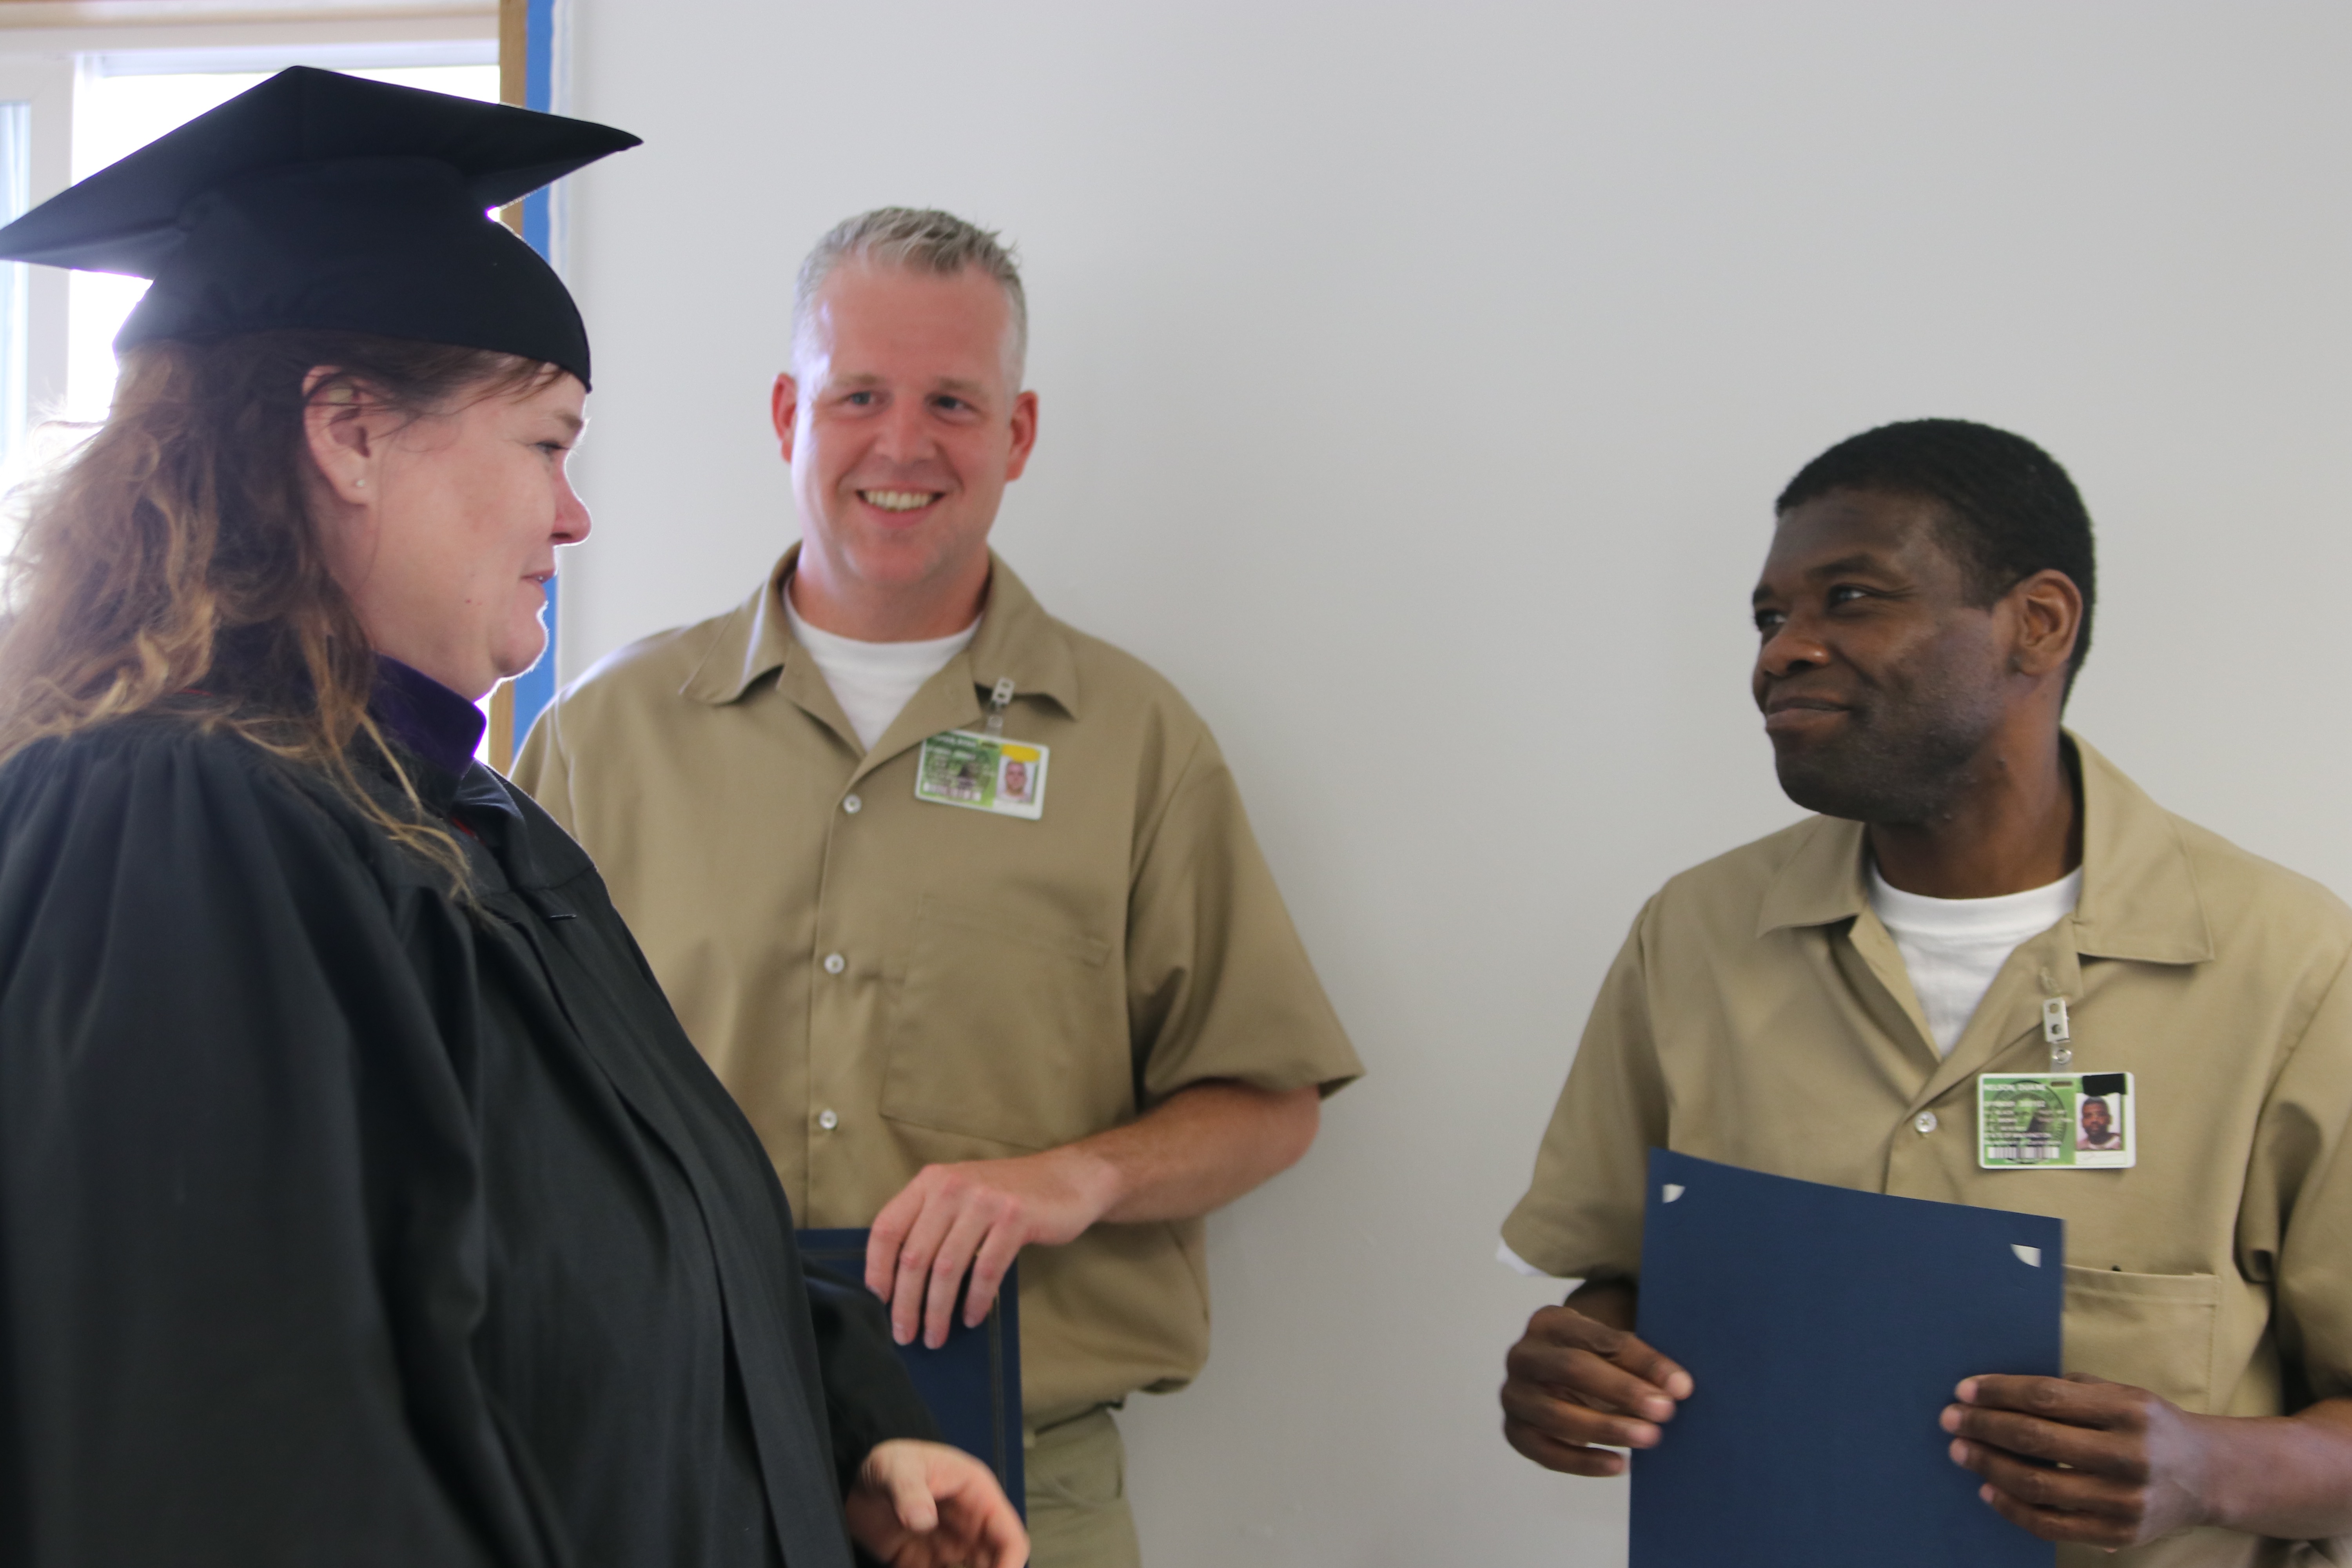 College in Prisons graduates at Monroe Correctional Complex